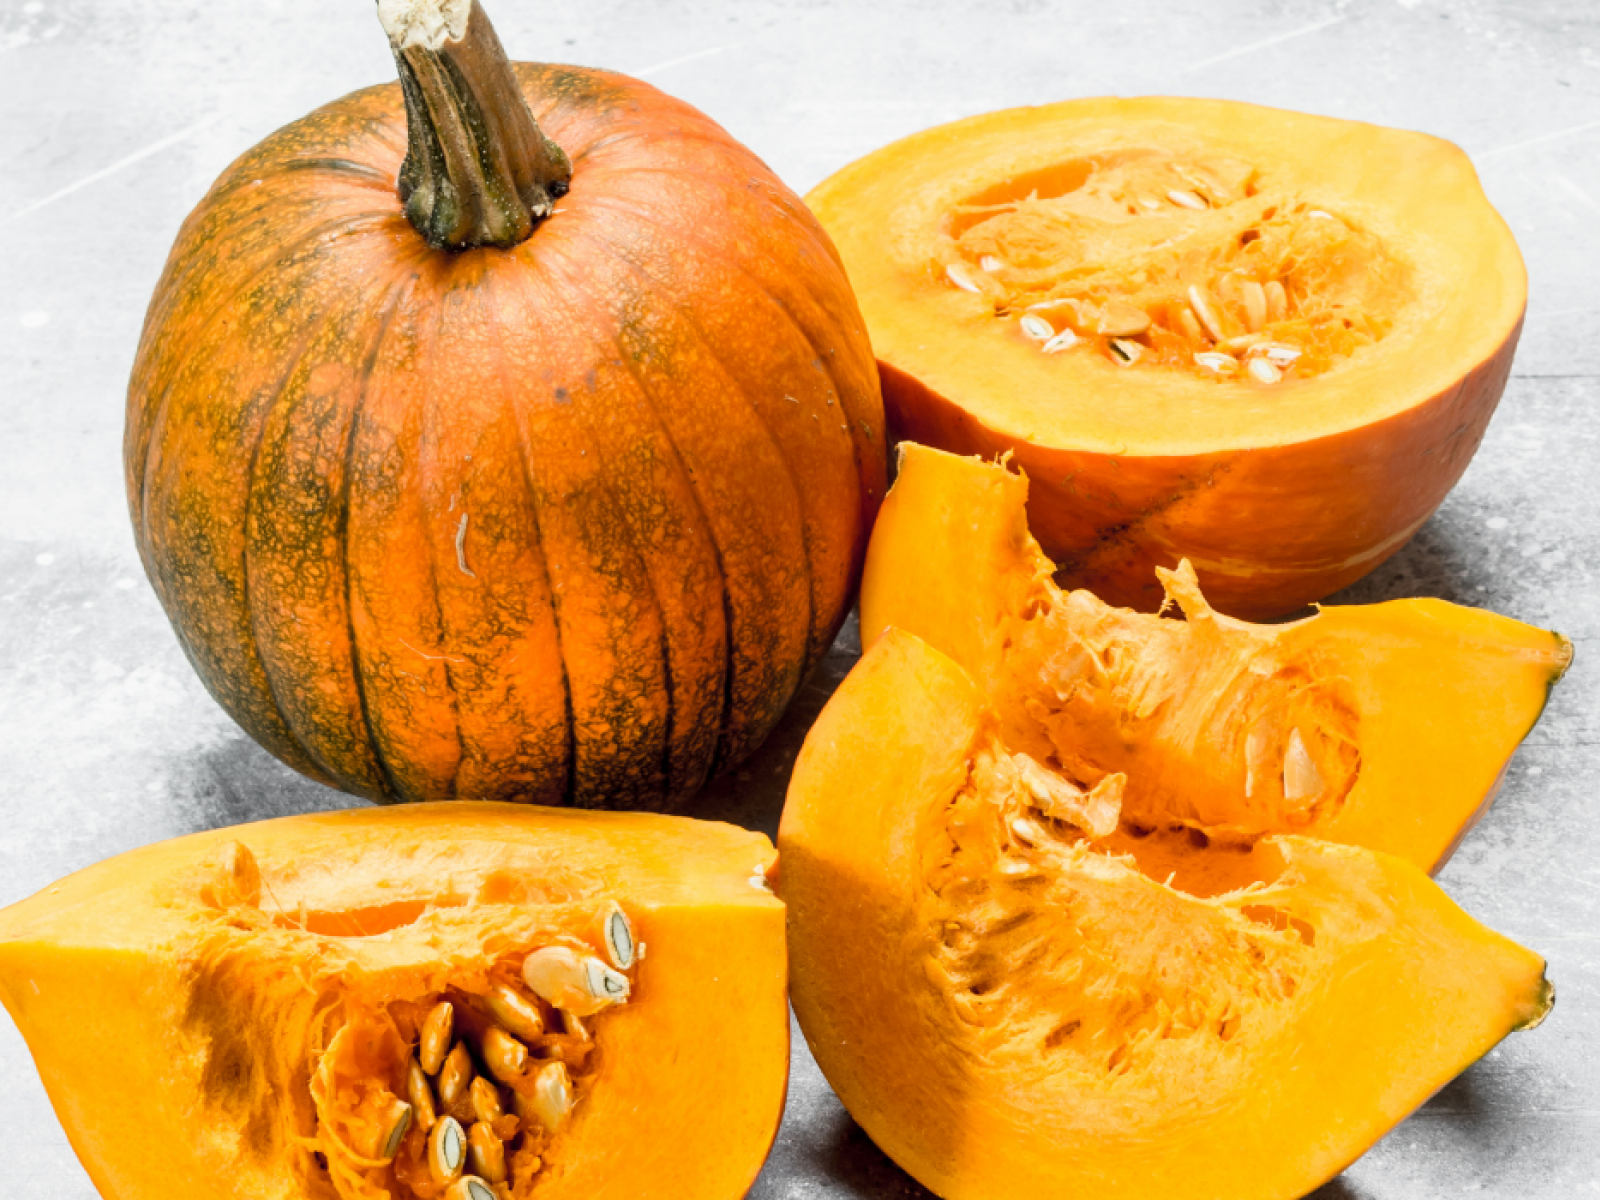 Inside Pumpkin Photos and Images & Pictures